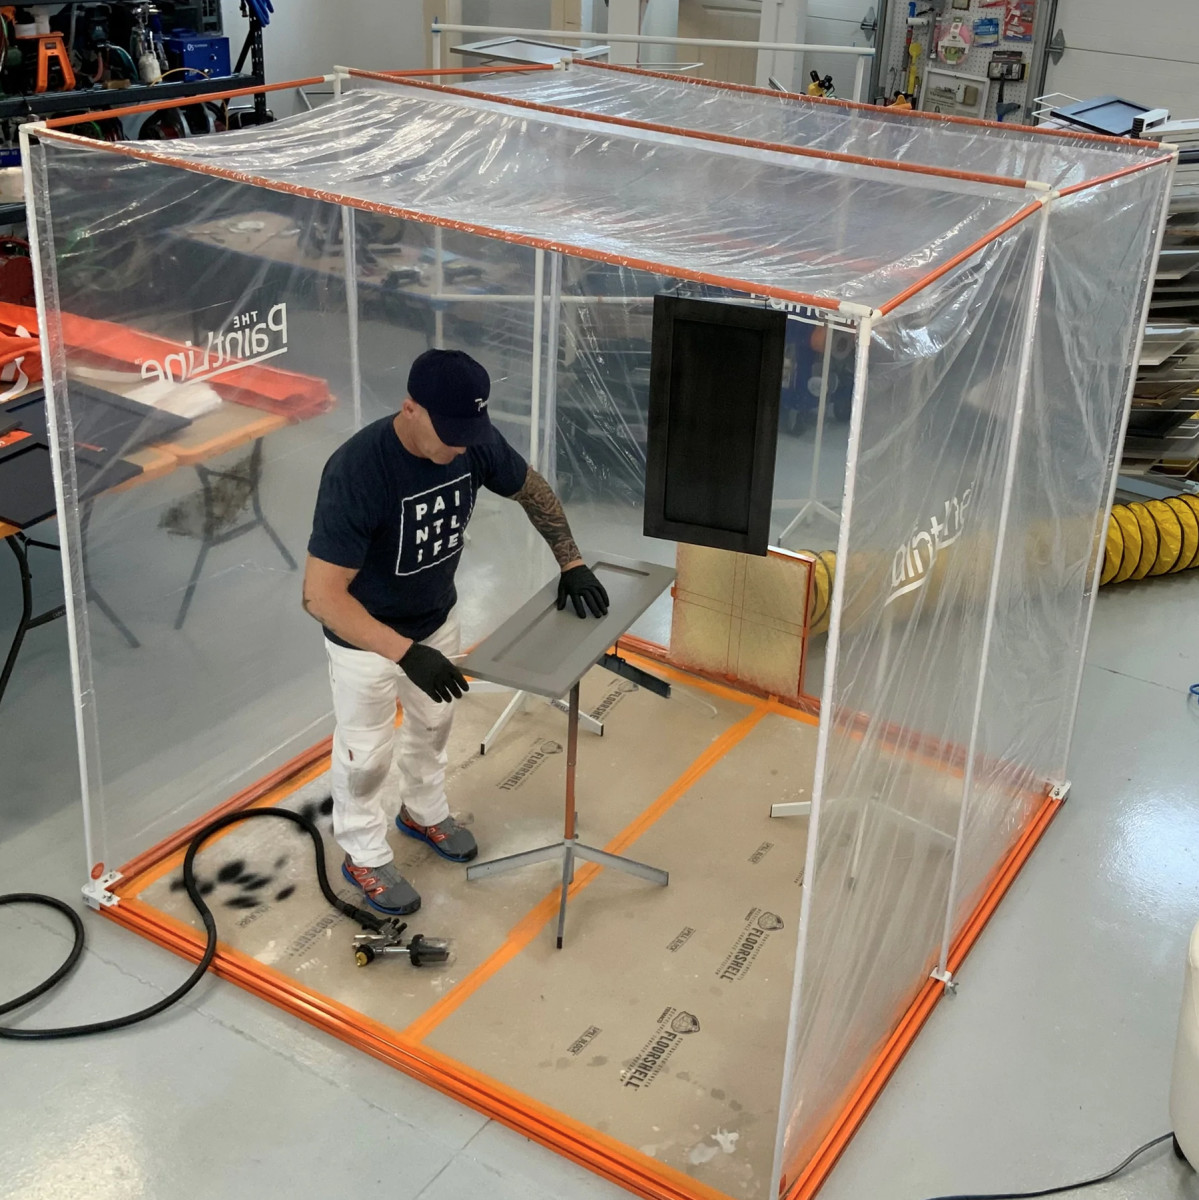 Portable Jobsite Spray Booth, available from The PaintLine.